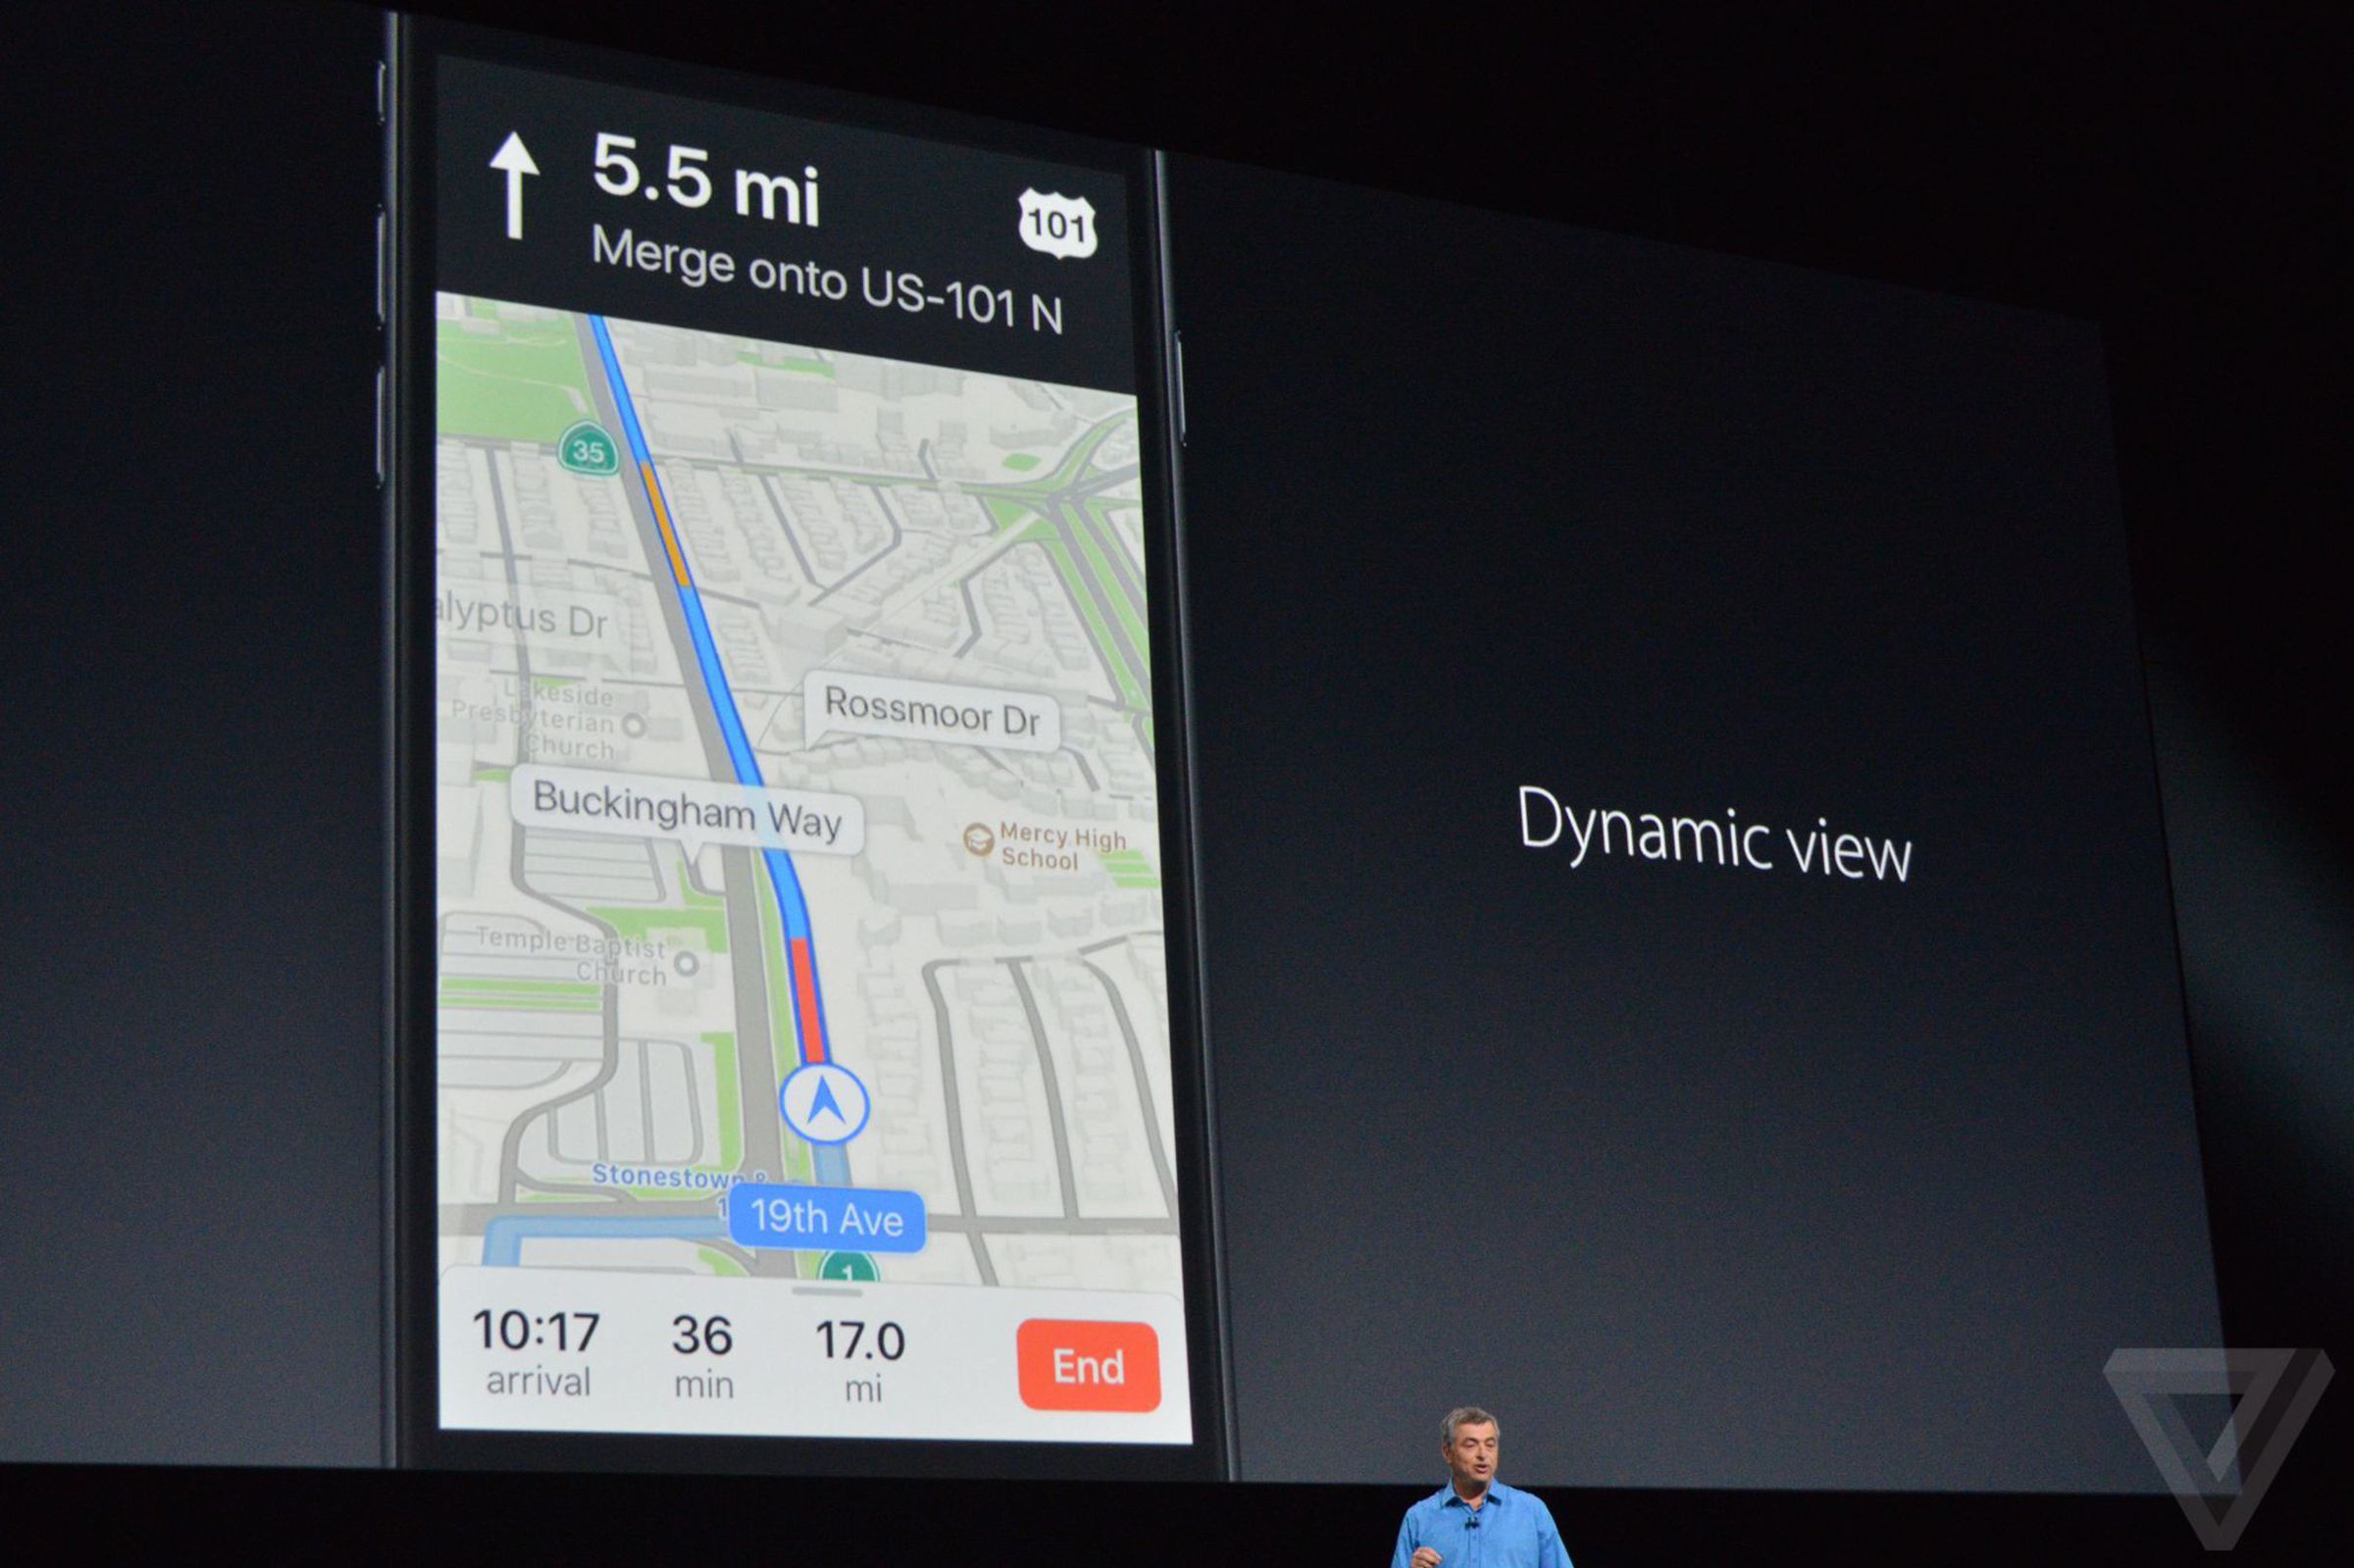 Maps at WWDC16 announcement photos